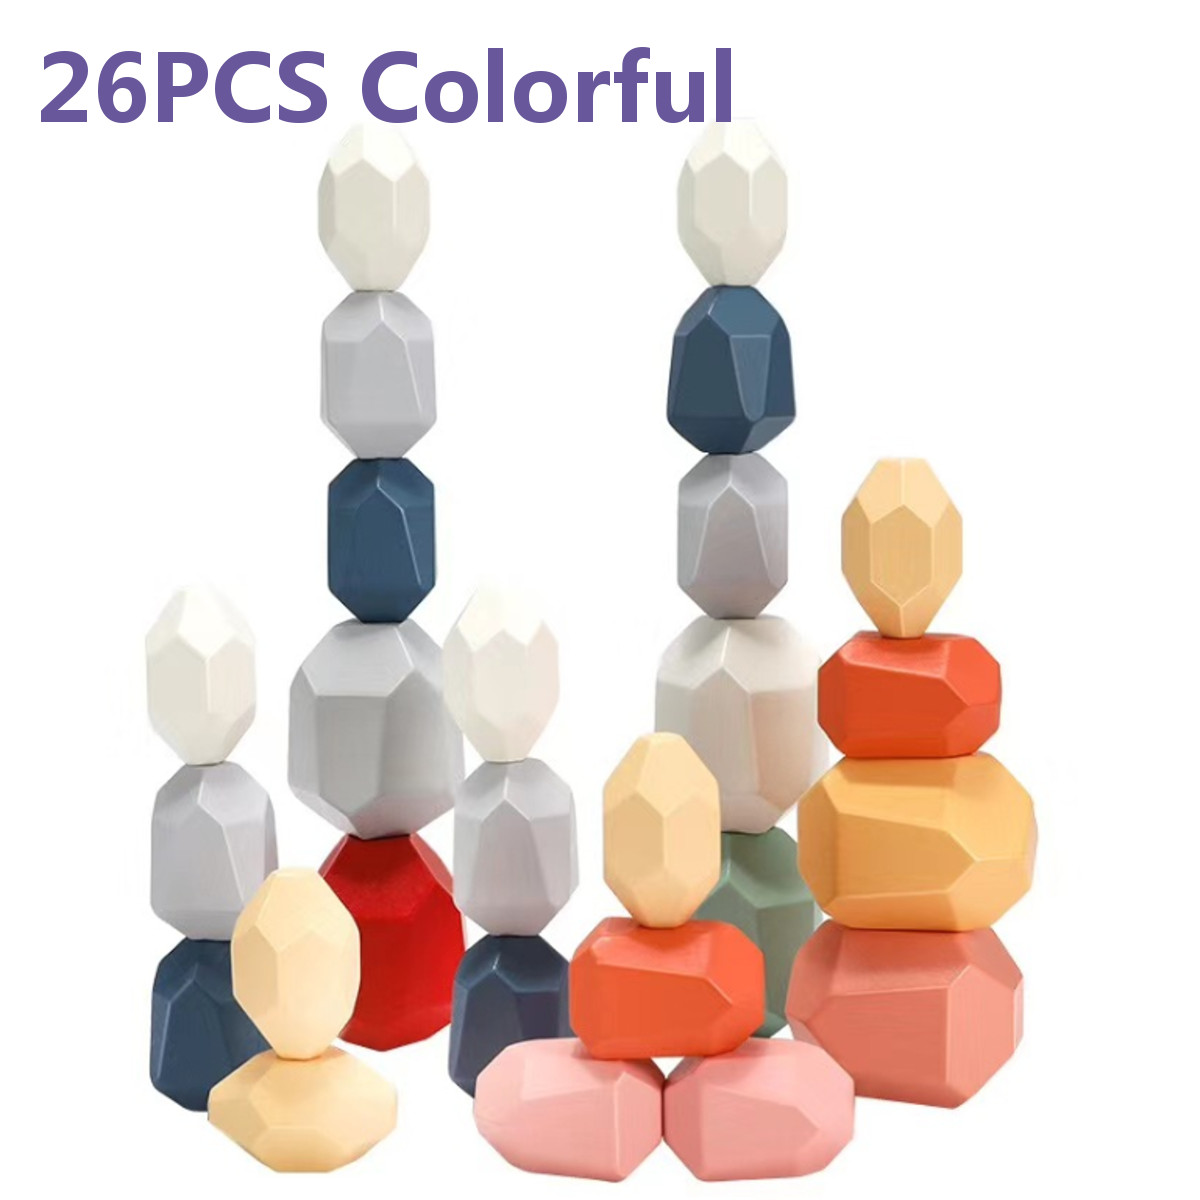 101626-Pcs-Wood-Colorful-Stone-Stacking-Game-Building-Block-Education-Set-Toy-for-Kids-Gift-1887123-3